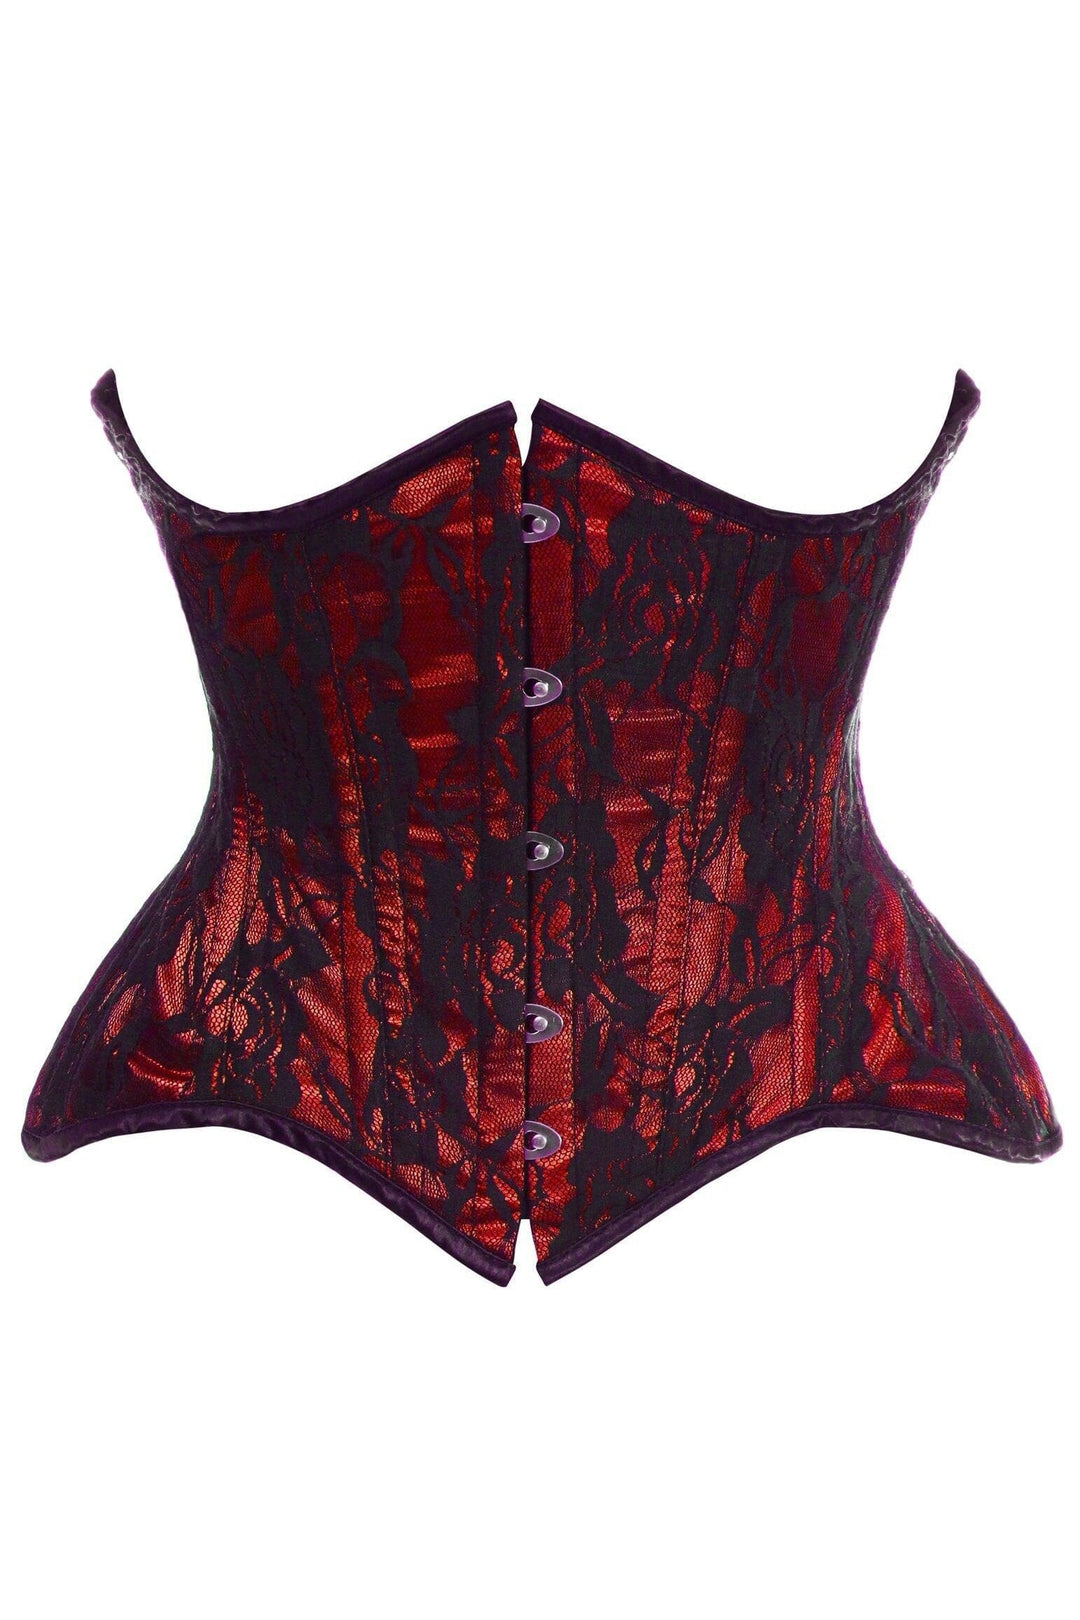 Top Drawer Red w/Black Lace Double Steel Boned Curvy Cut Waist Cincher Corset-Waist Cincher-Daisy Corsets-Red-2X-SEXYSHOES.COM